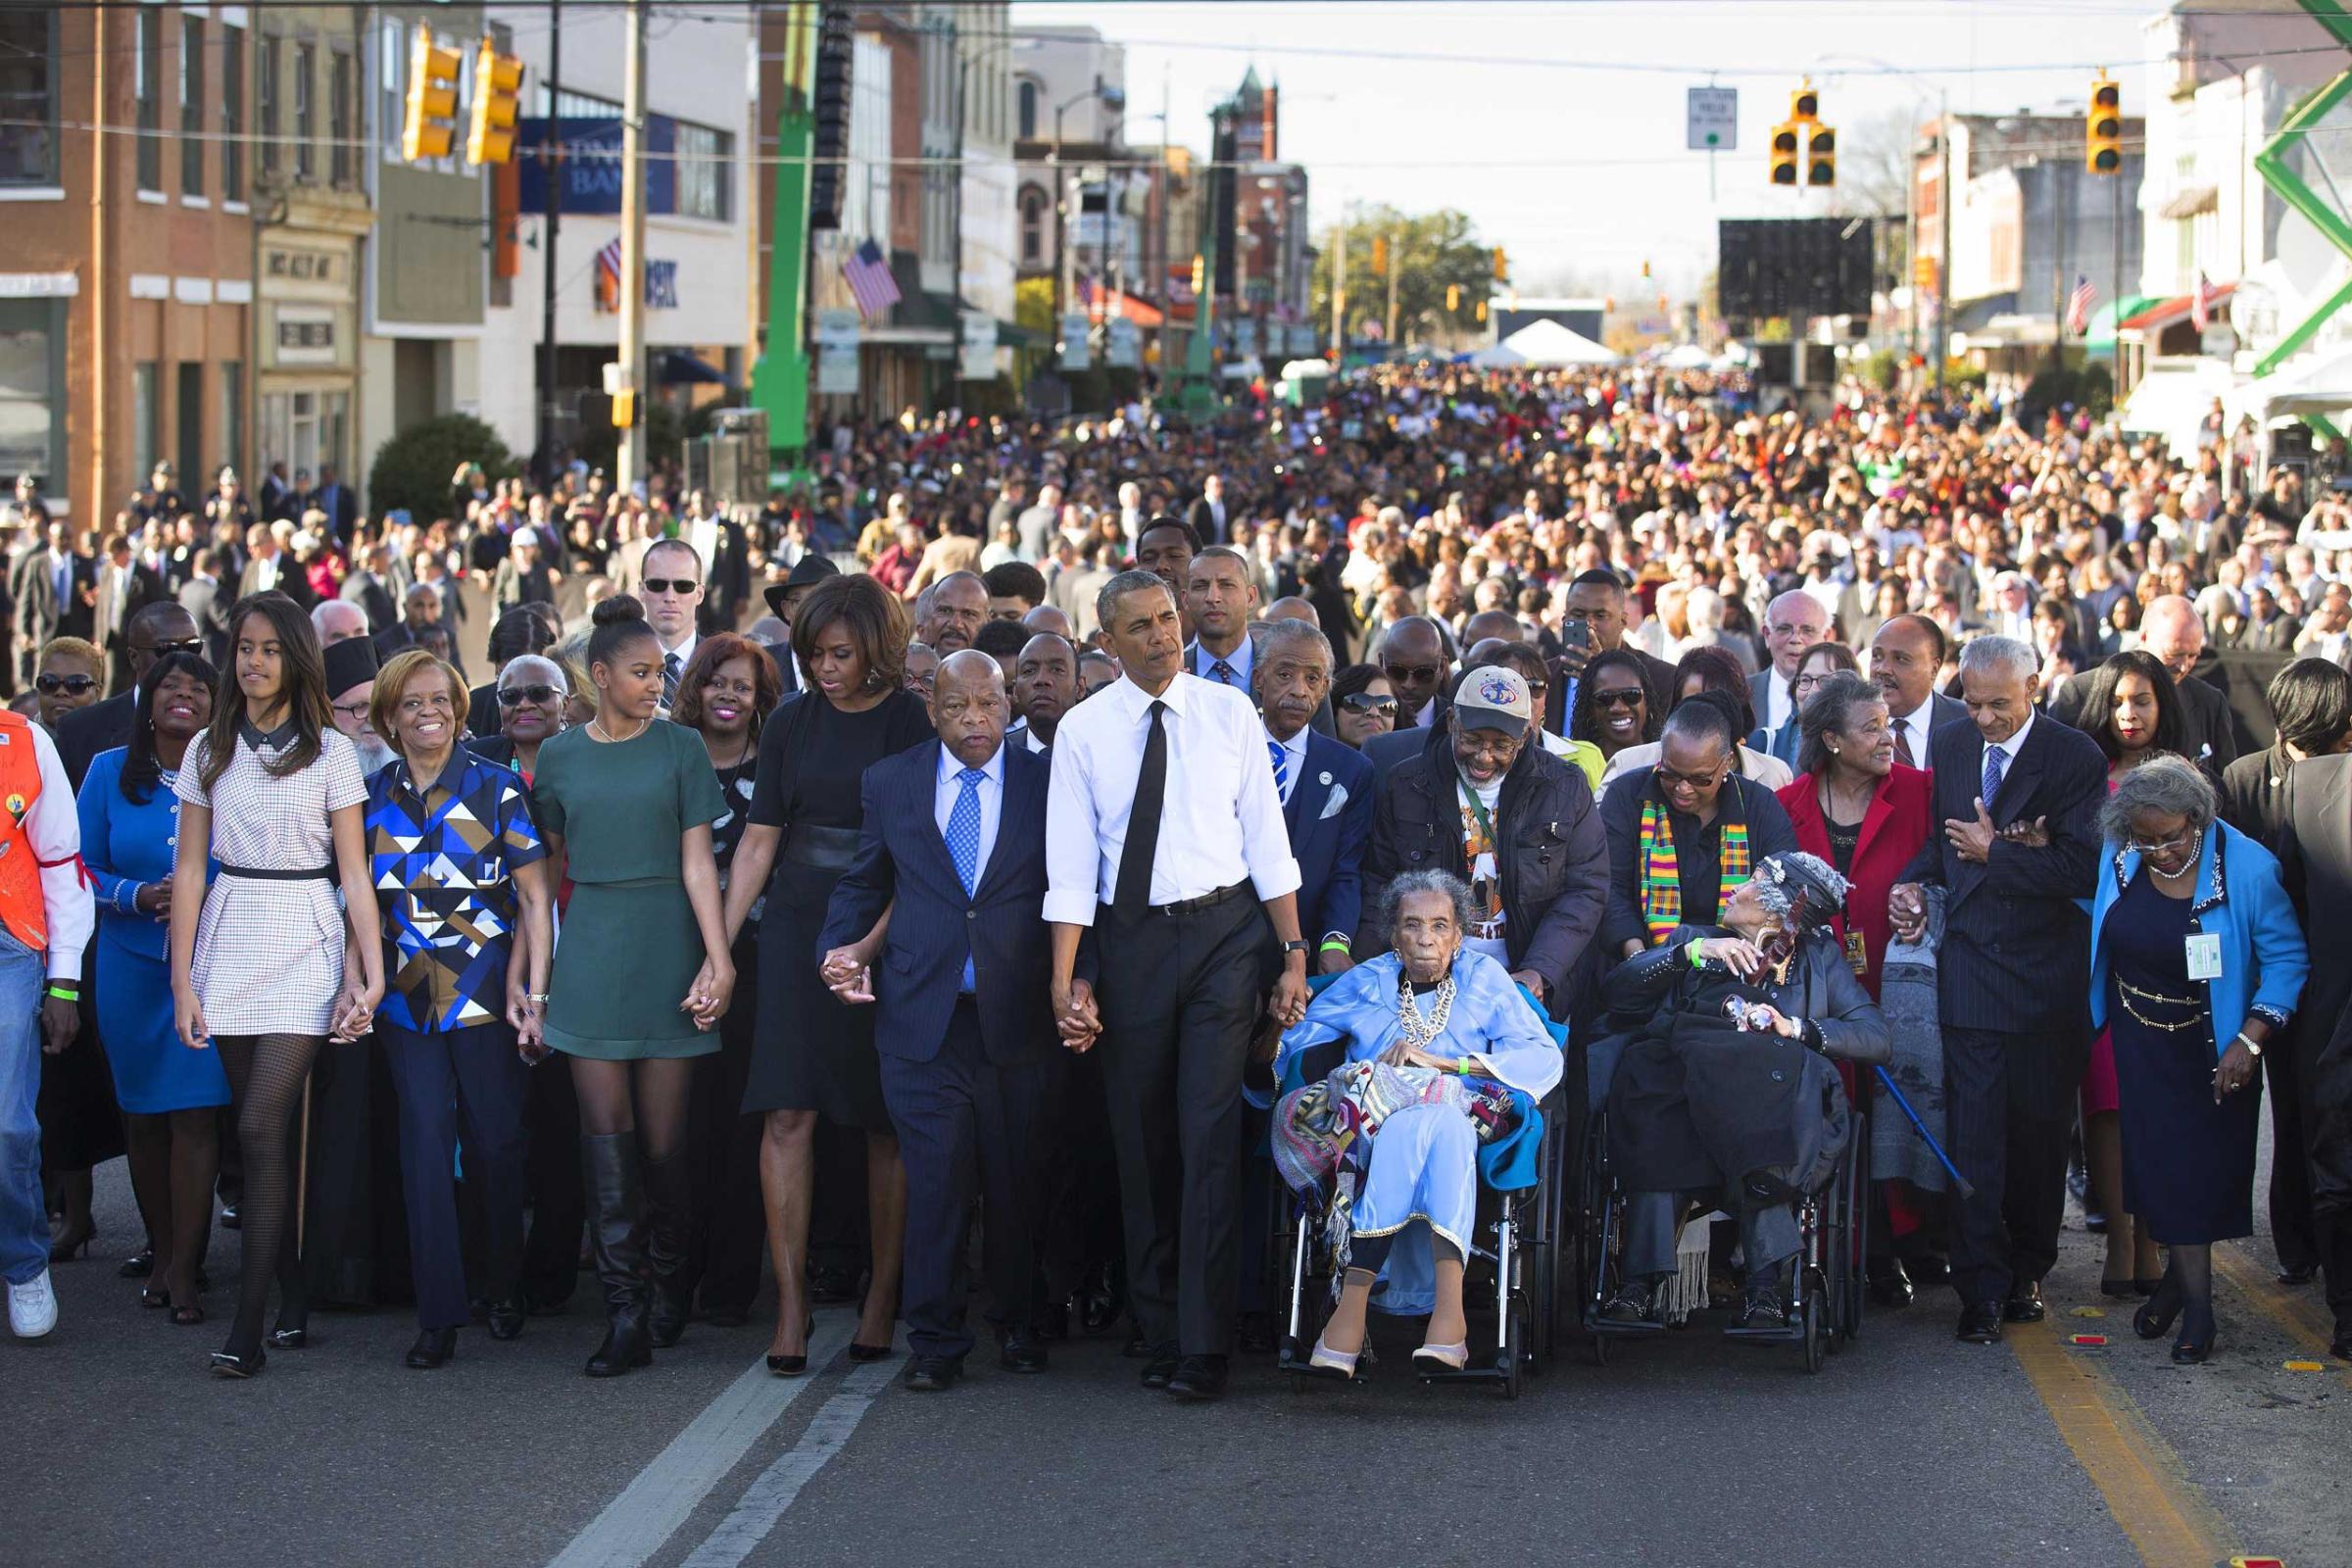 President Barack Obama, Amelia Boynton, right, Rep. John Lewis (D-Ga.) and the first family lead a march toward the Edmund Pettus bridge, 50 years to the day after Bloody Sunday in Selma, Ala. In an address, Obama rejected the notion that race relations have not improved in the years since—as well as the notion that racism has been defeated. March 7, 2015